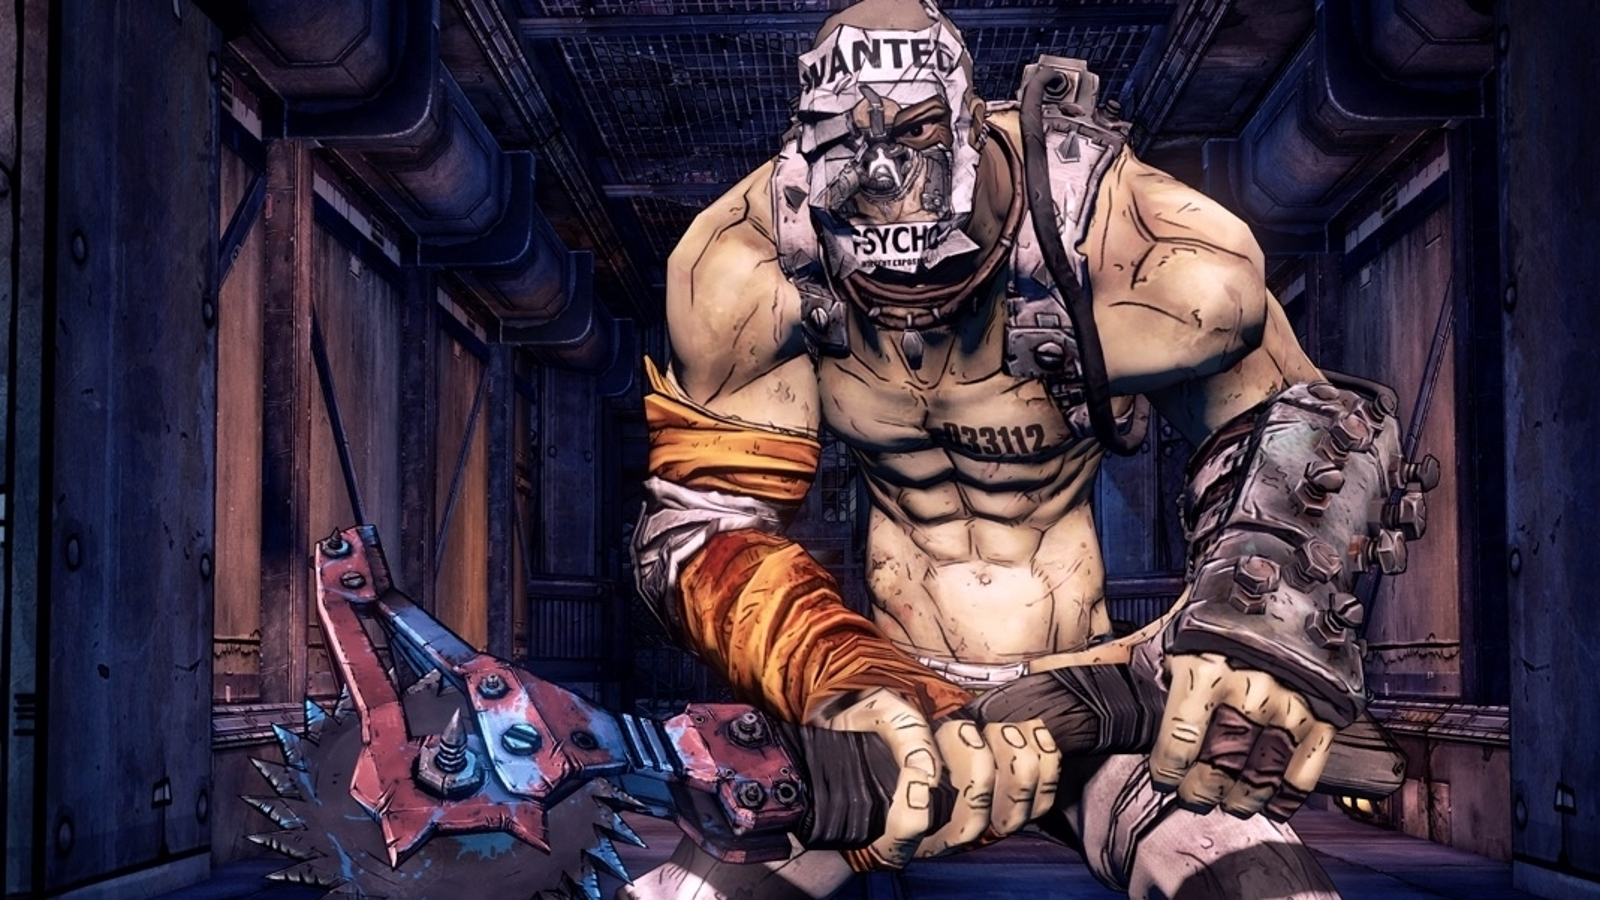 Borderlands 3' will get 4K and 4-player split-screen on PS5 and